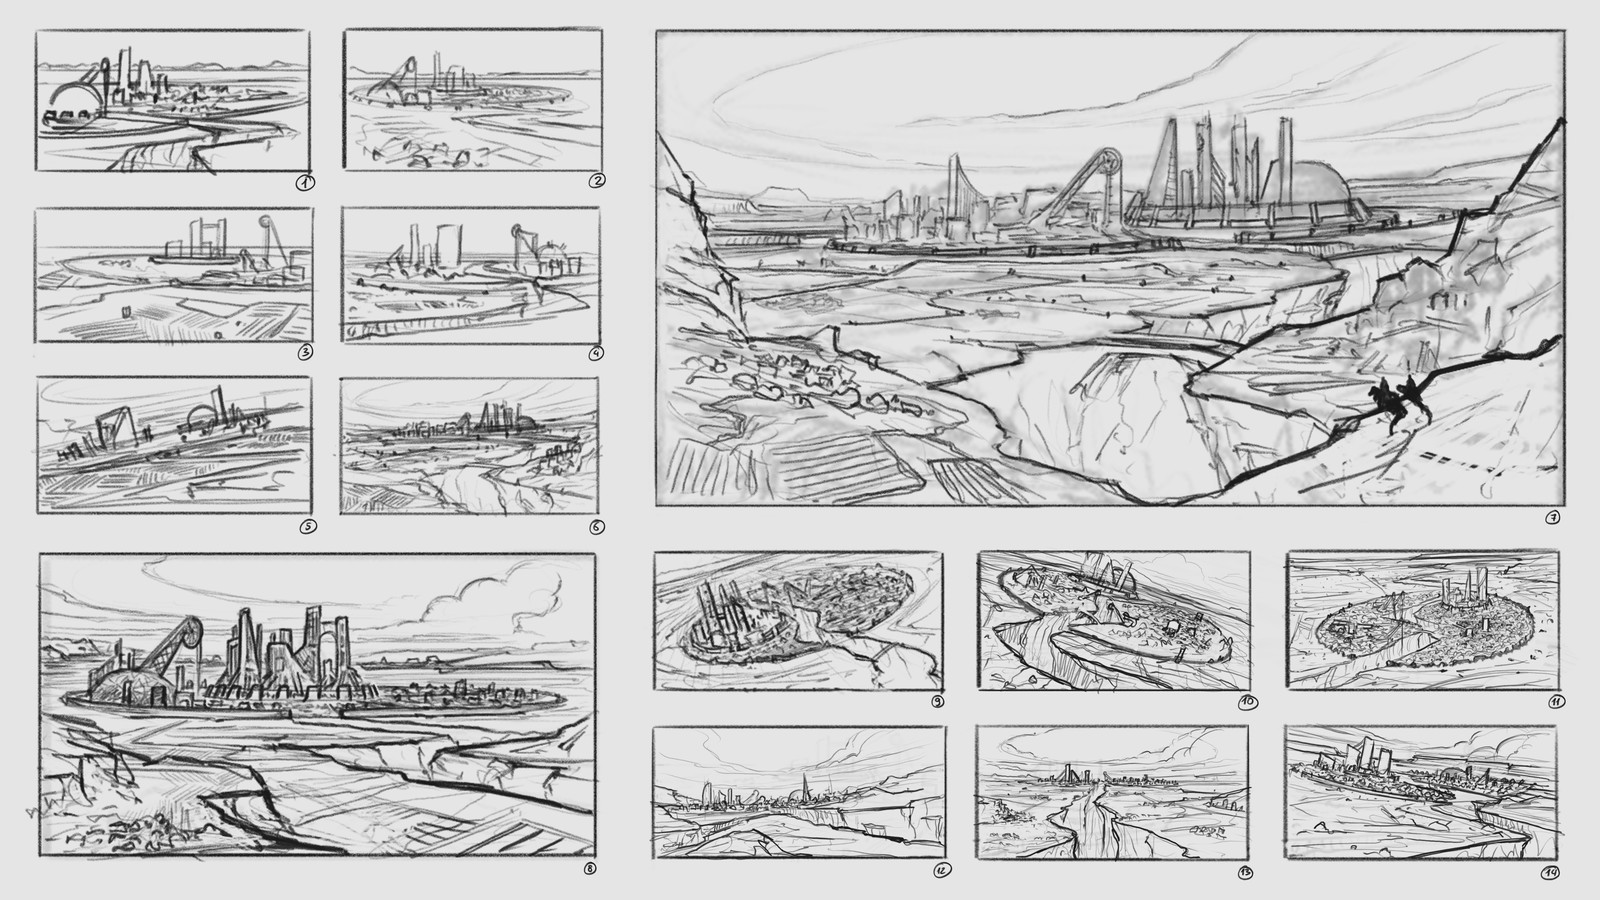 Thumbnail sketches and ideas for the city concept and camera